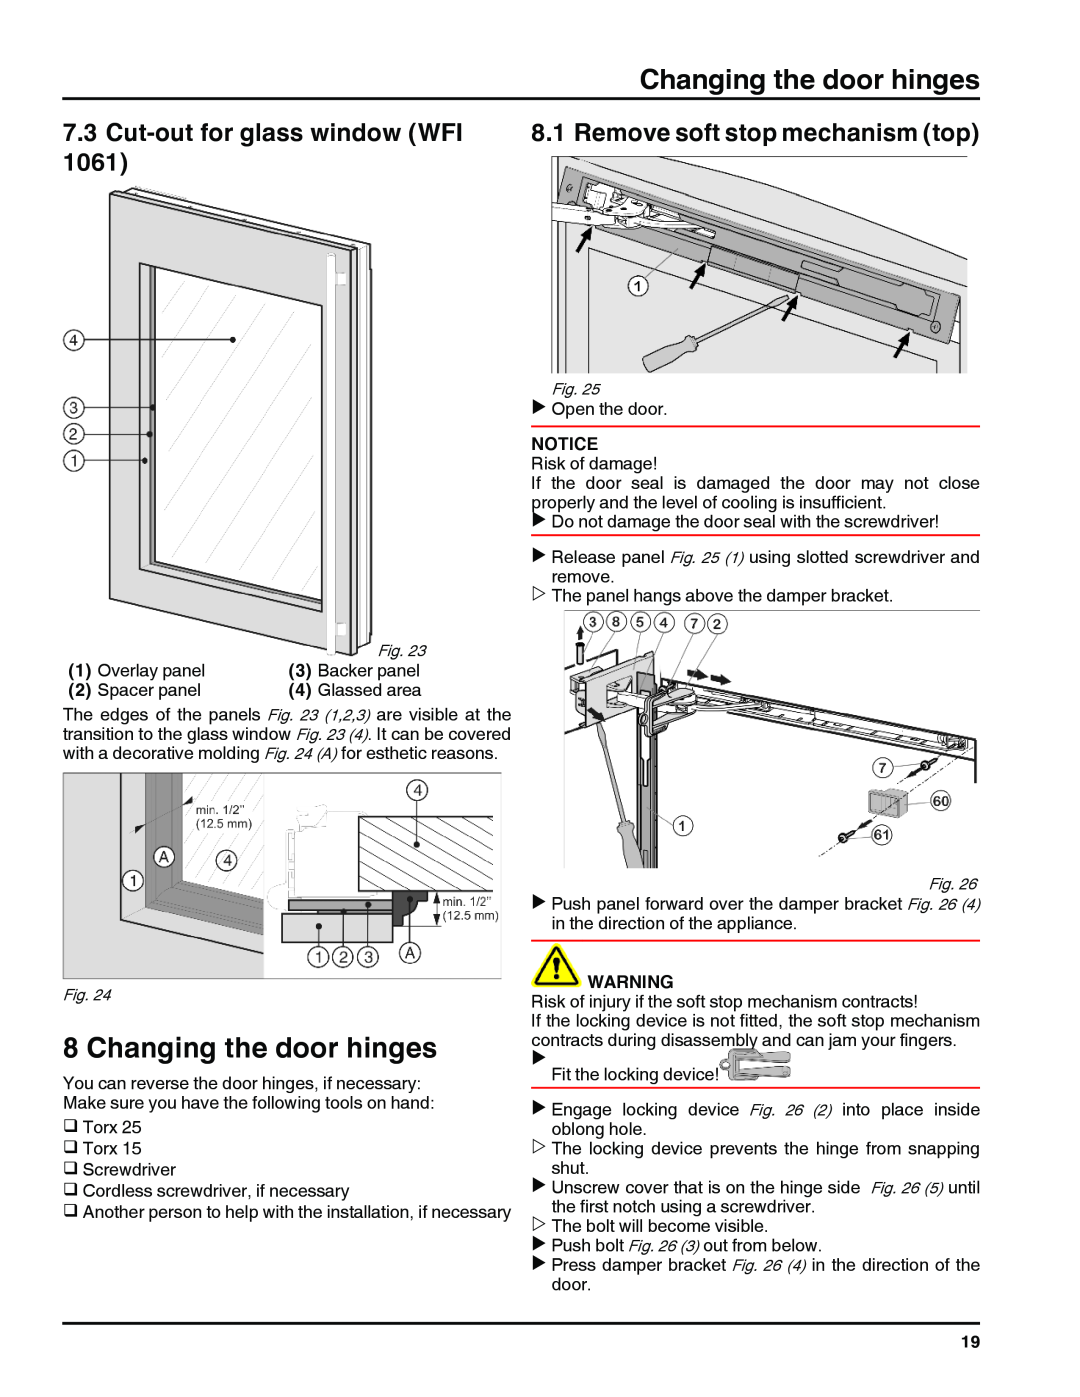 Liebherr RI 1410/ RBI 1410/ FI 1051 manual Changing the door hinges, Cut-out for glass window WFI, 1061, Glassed area 